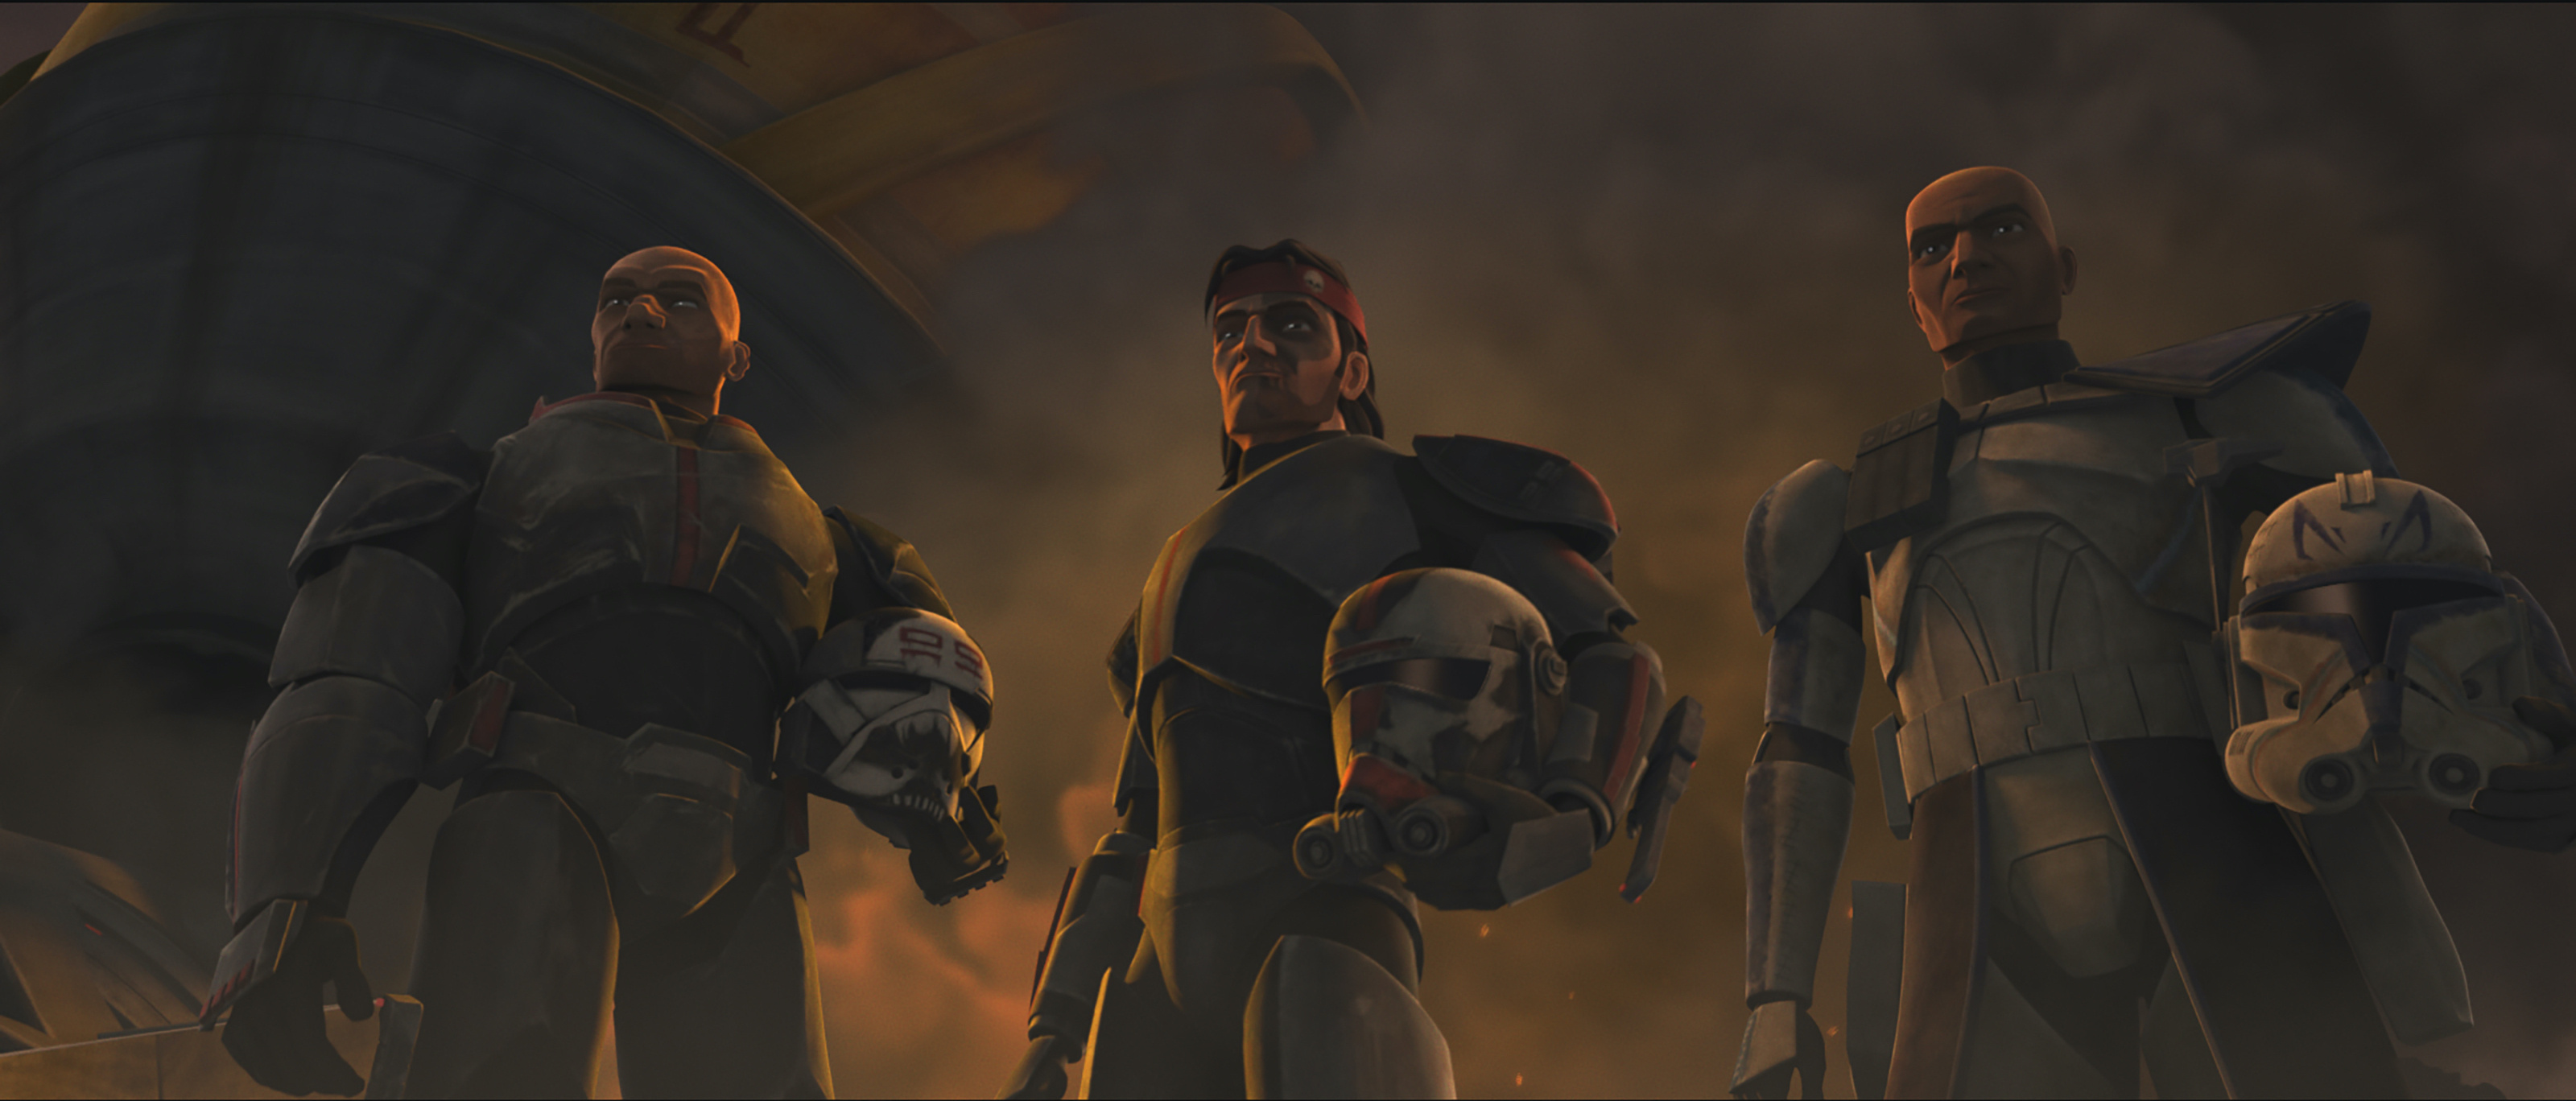 Star Wars: The Bad Batch: A clone commando squad making their way through the galaxy shortly after Order 66. 3200x1370 Dual Screen Wallpaper.